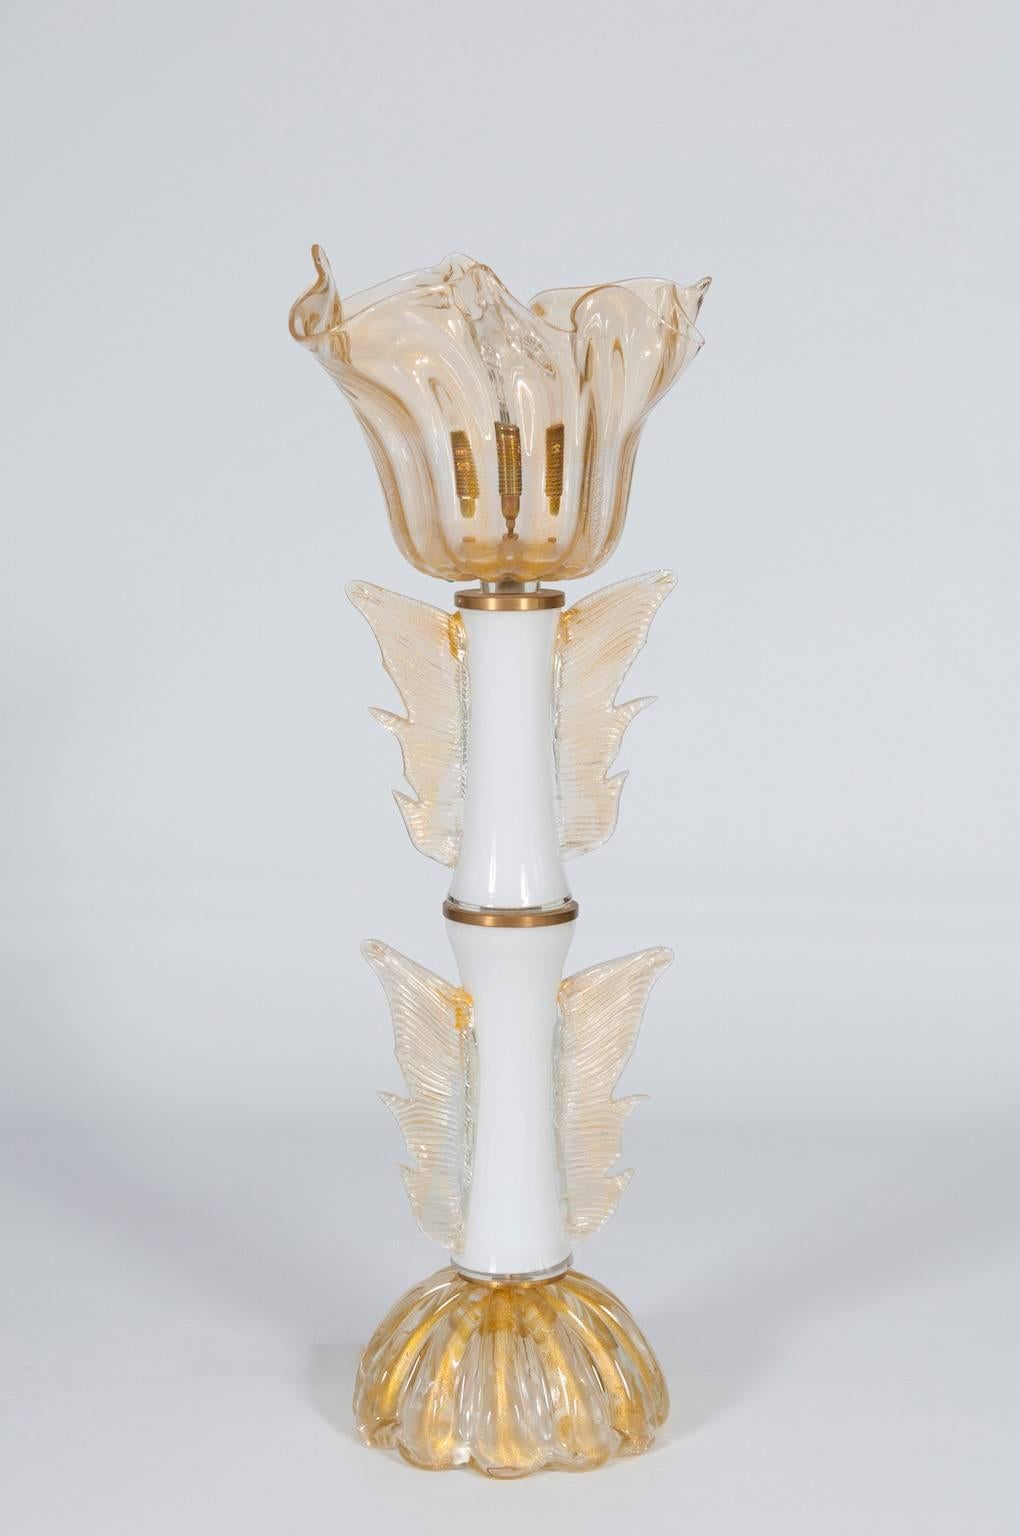 Fantastic, Italian Venetian, Table Lamp, blown Murano Glass, White Gold 24-K & Brass ,1970s.
The masterpiec is made up of a main stem with two Murano Glass cylinders white and having a pair of gold wings. At the top of them the main Murano Glass